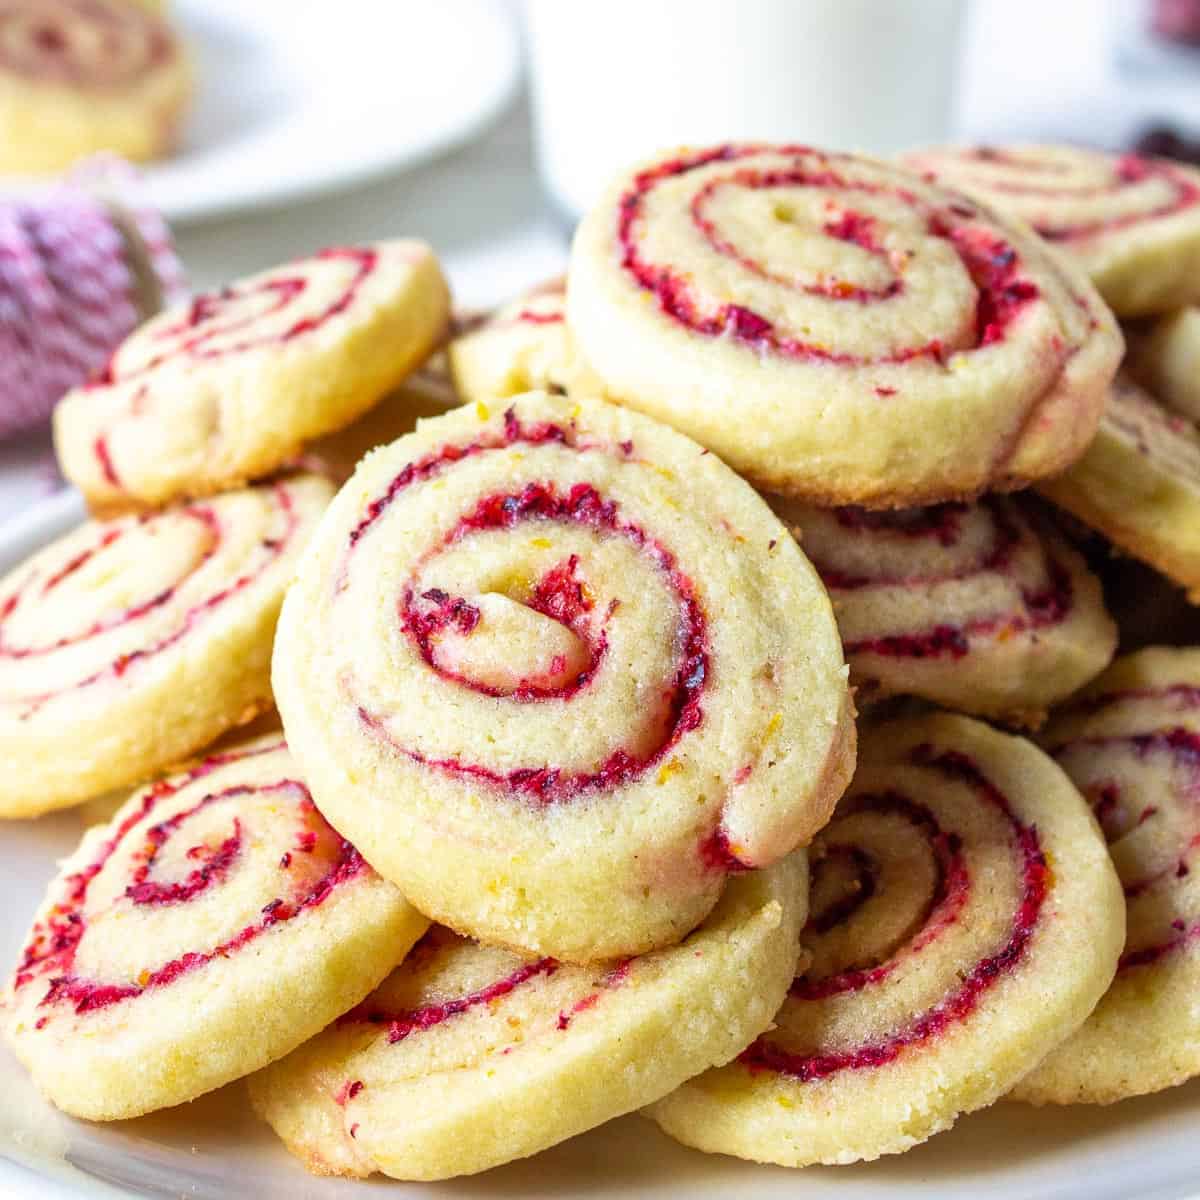 Cranberry orange cookies piled on a plate.